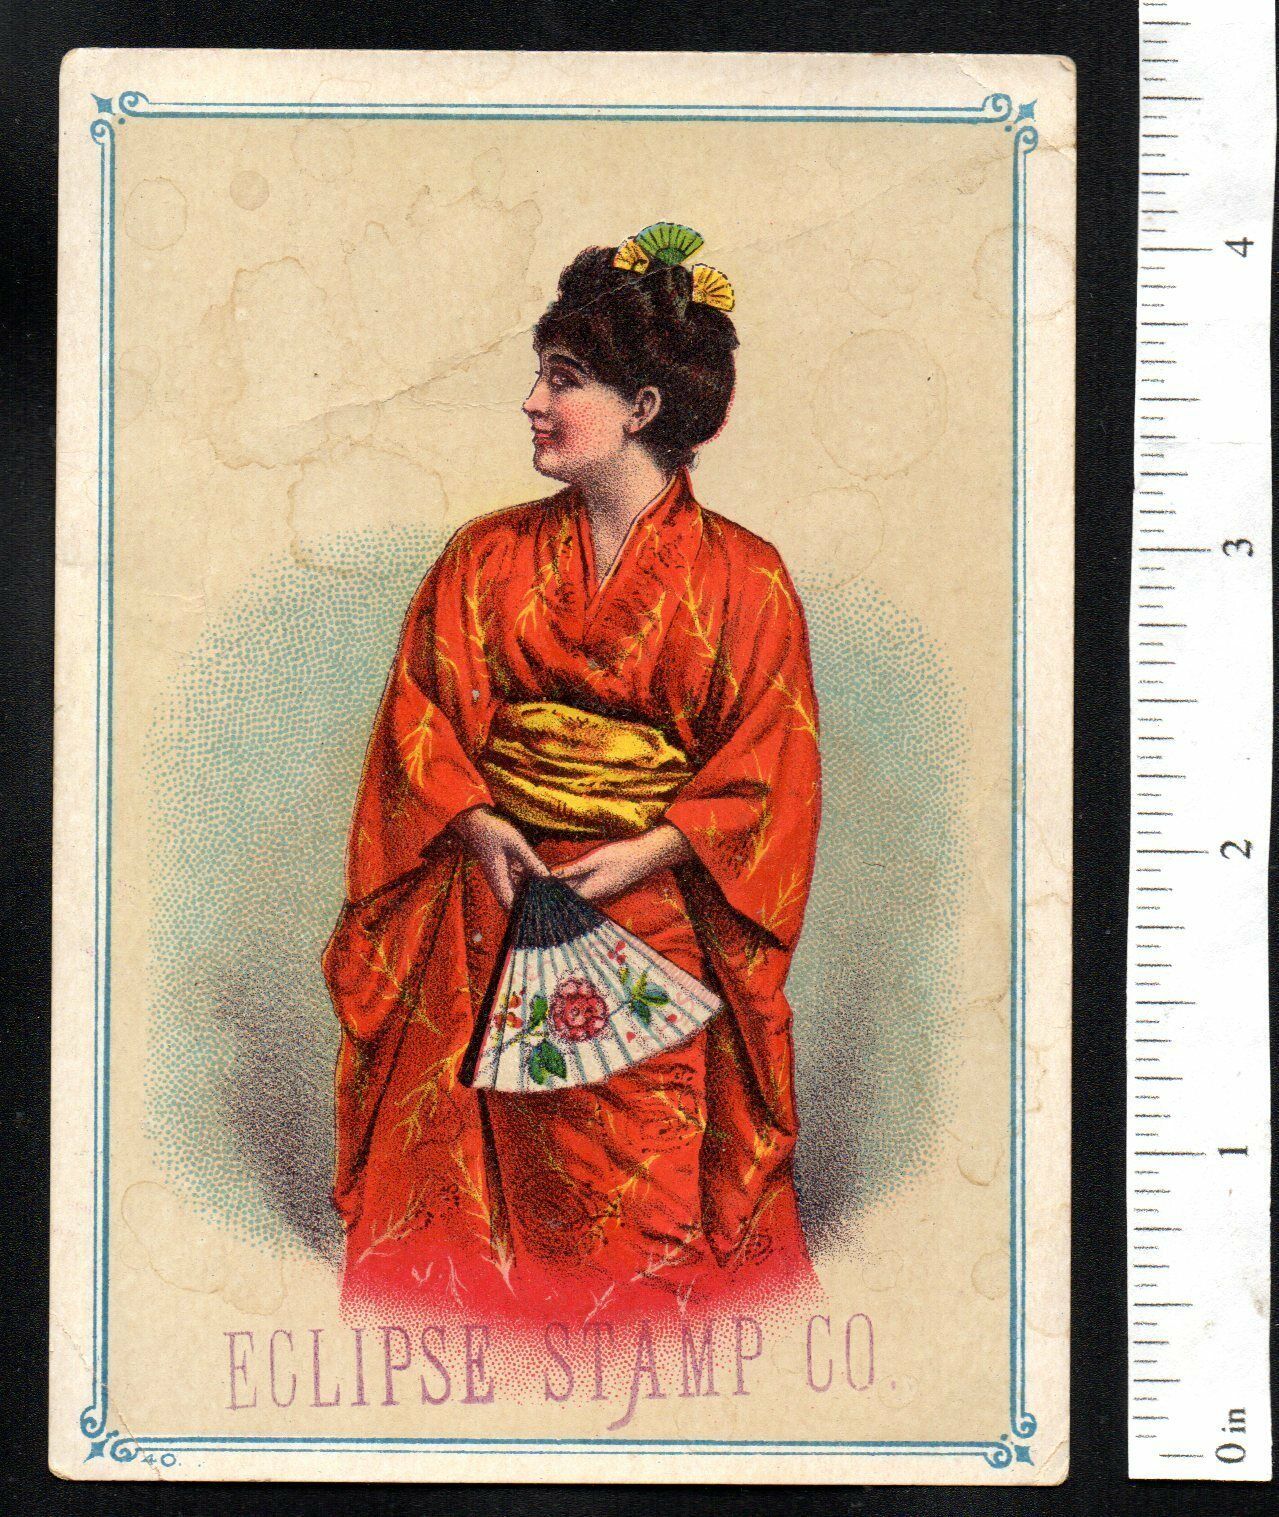 PRETTY LADY IN JAPANESE DRESS ECLIPSE STAMP CO 1880s VICTORIAN ADVERTISING TRADE